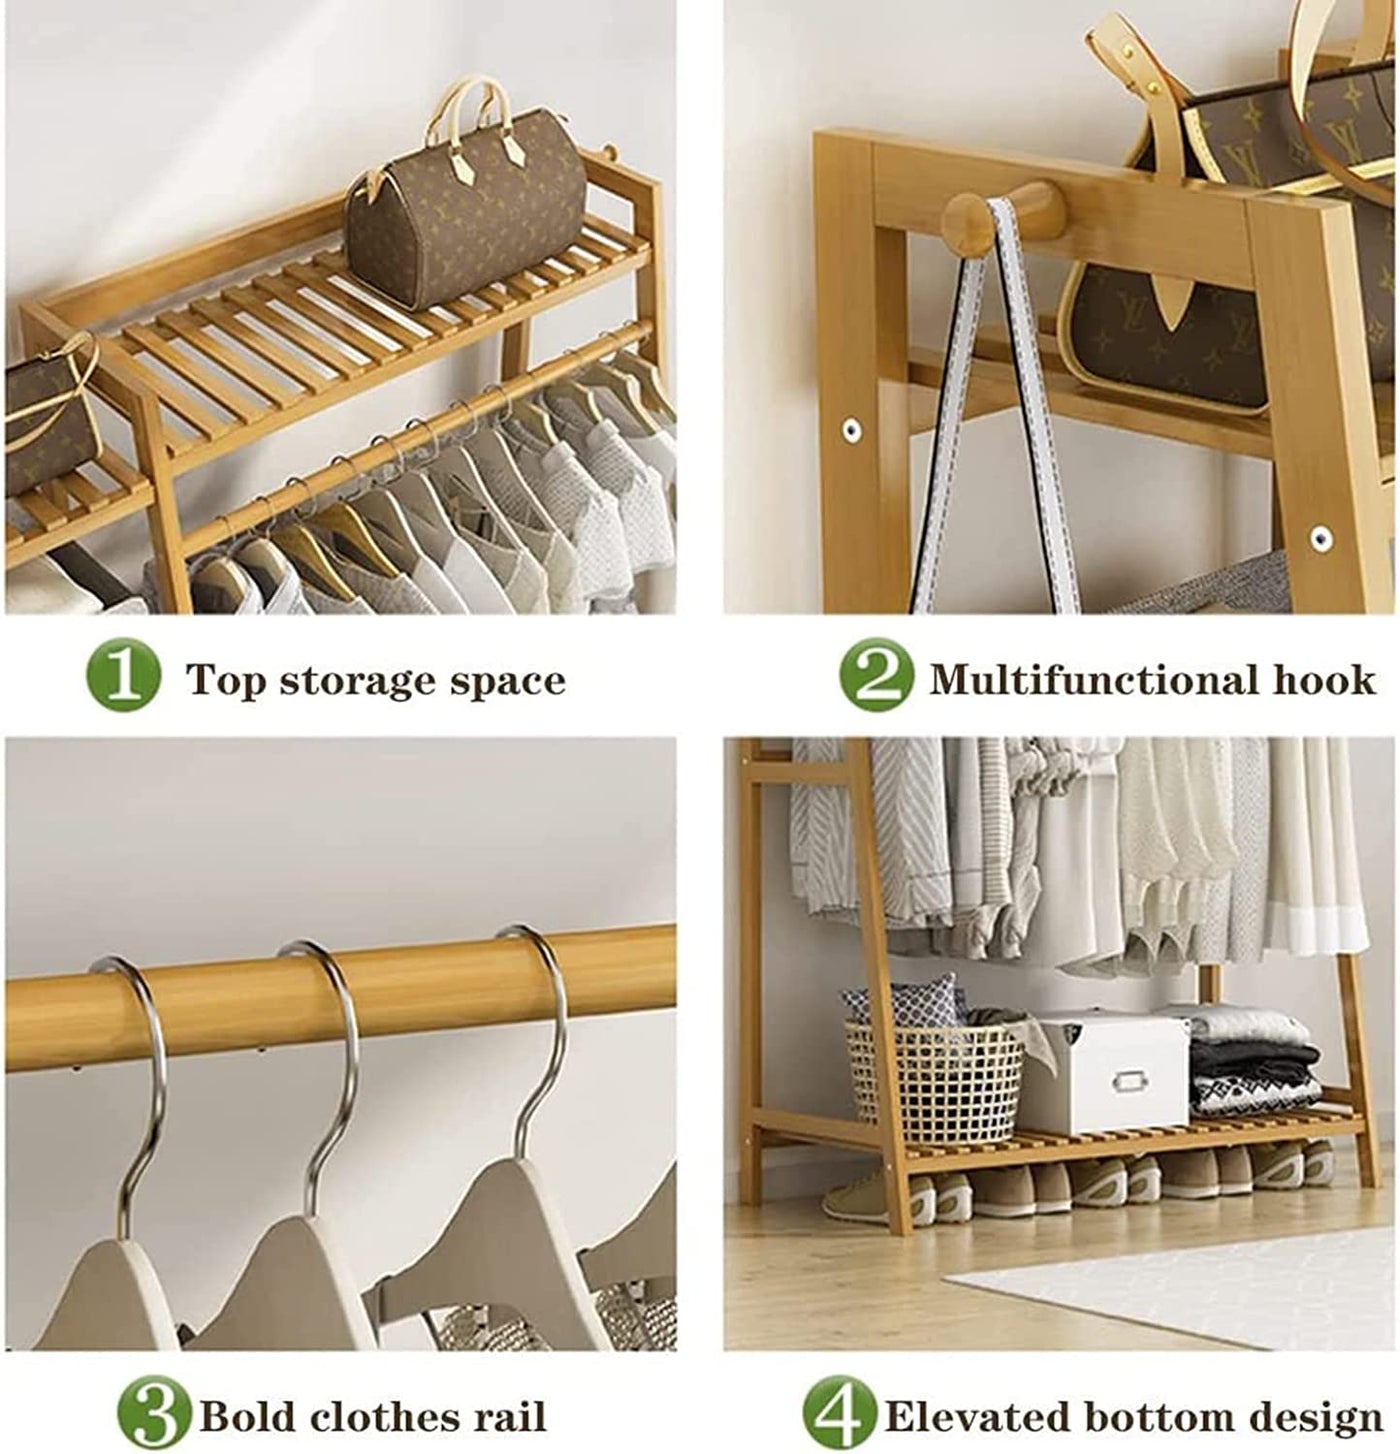 Wooden Clothing Rack with 5 Tiers(130x40x140cm)